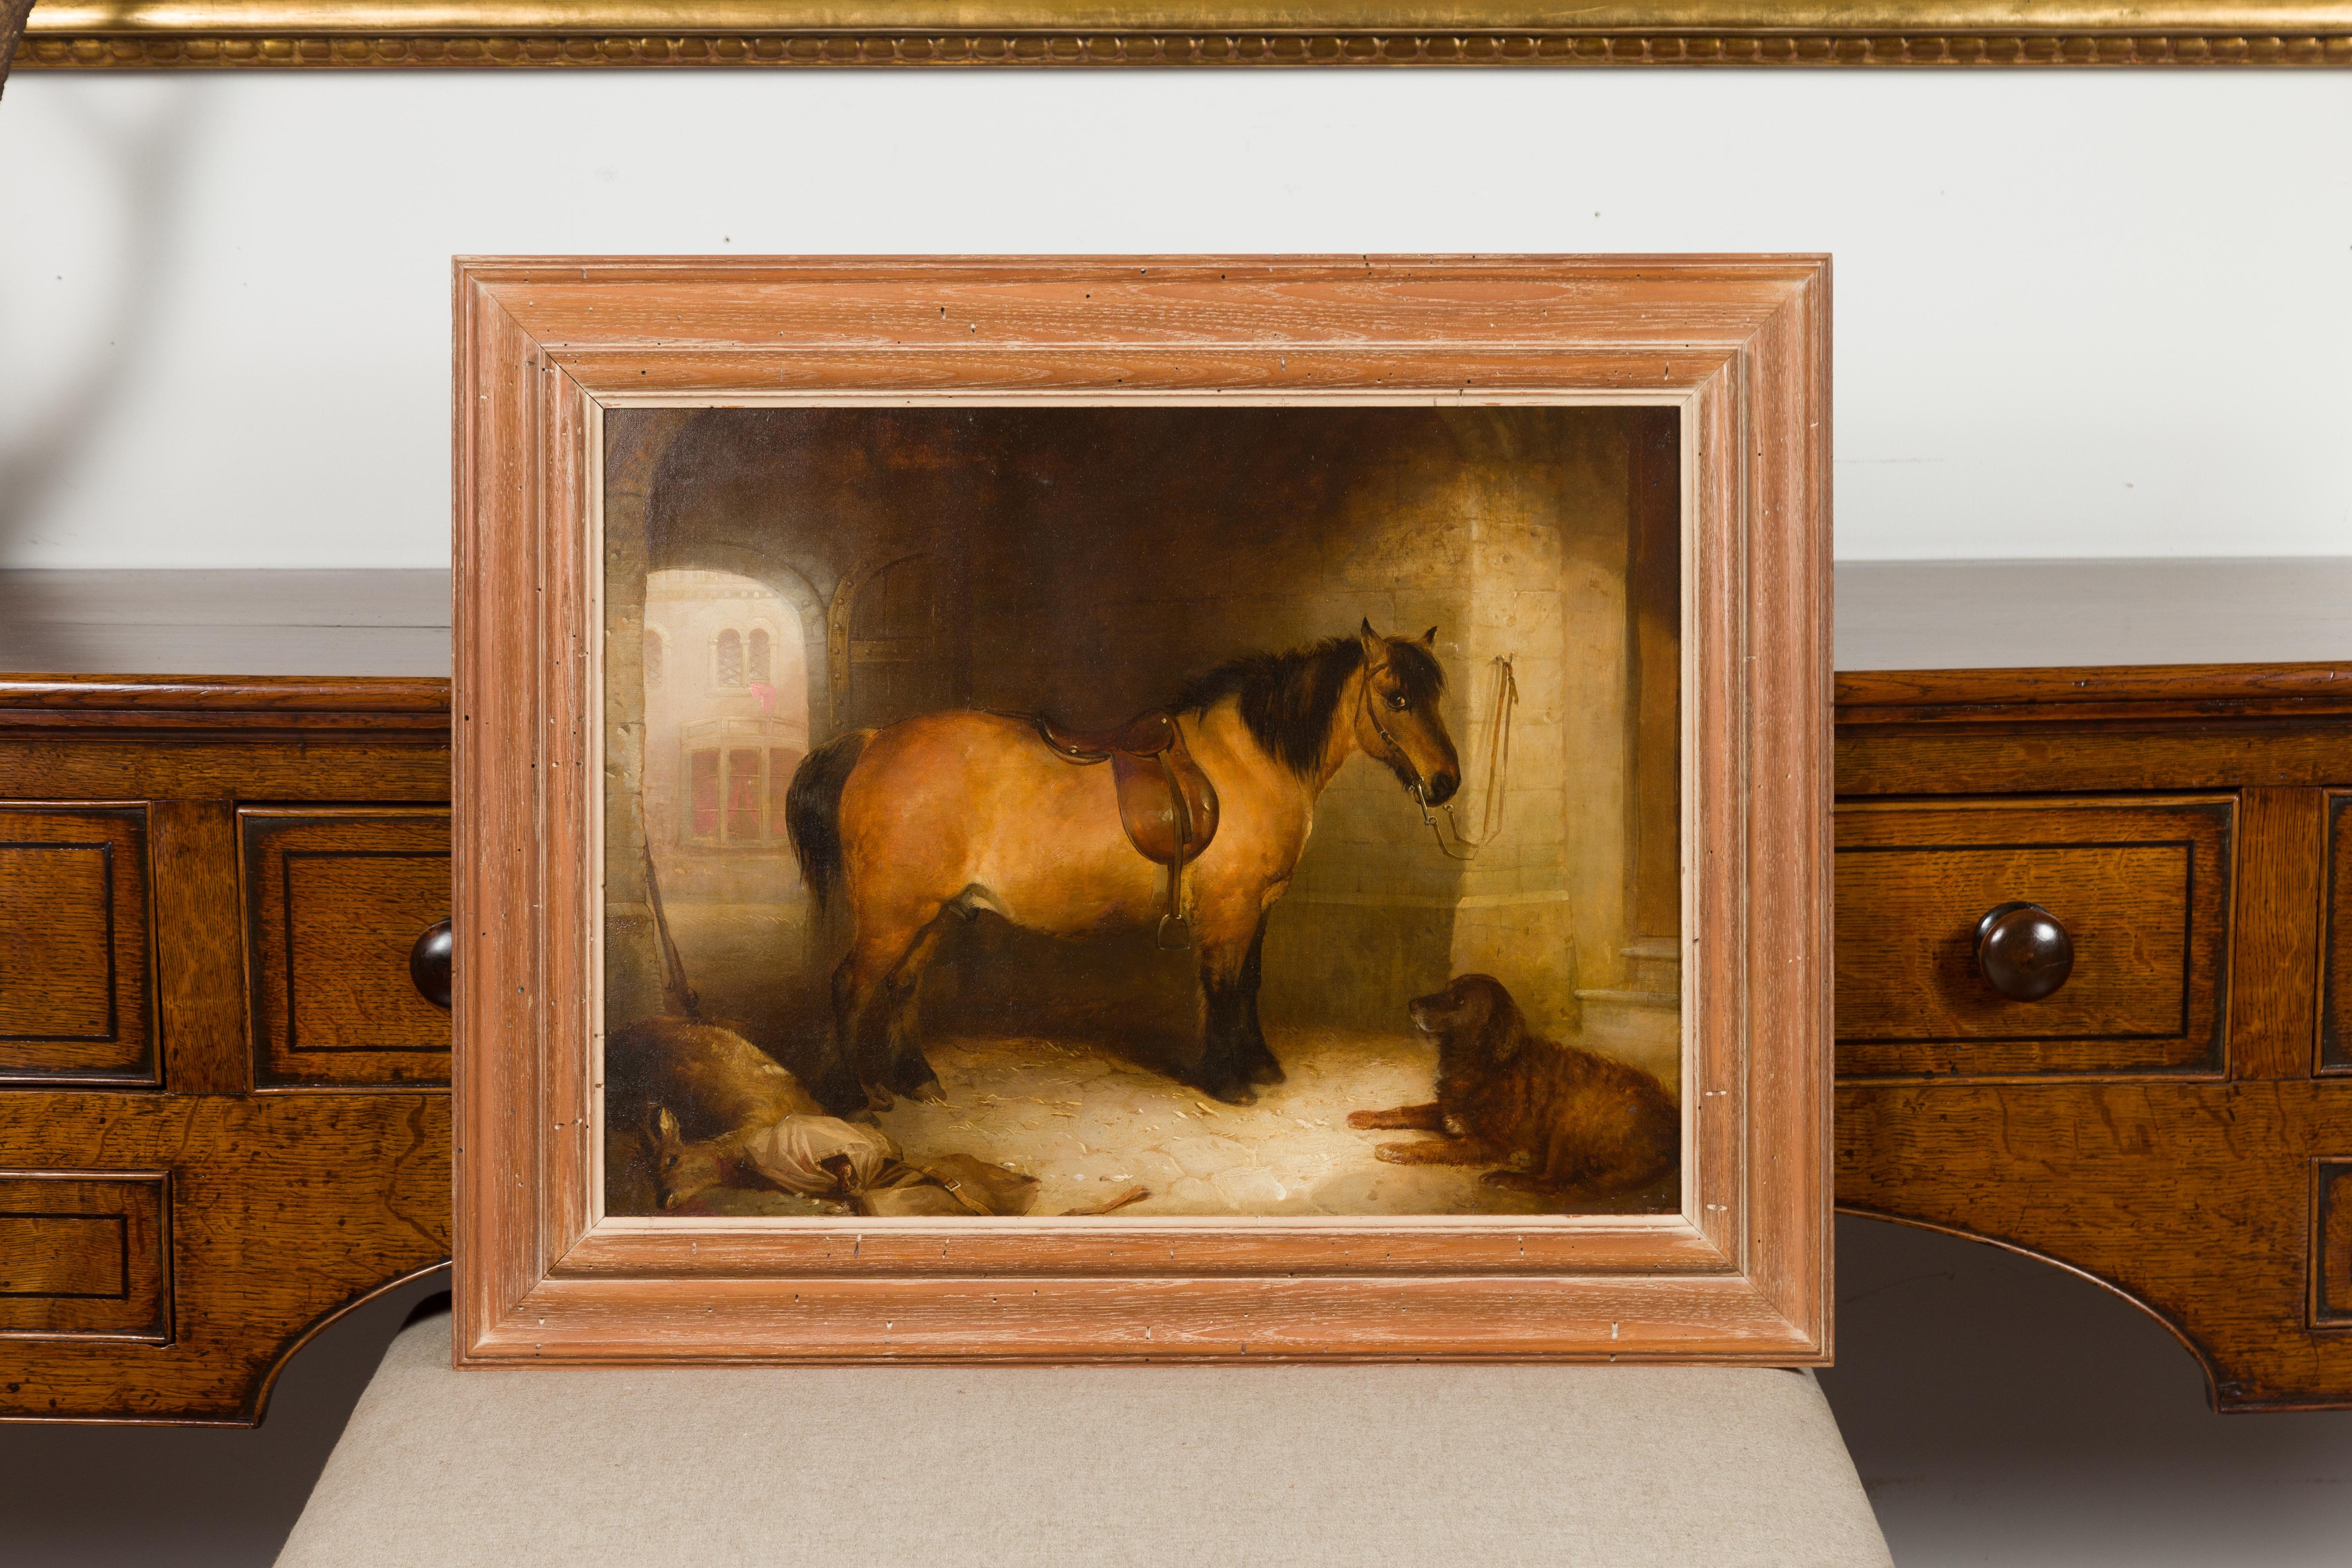 An English late 19th century oil on canvas painting from the circle of Landseer, depicting a horse and a dog in a stable. Created in England during the last quarter of the 19th century, this oil on canvas painting attracts our attention with its